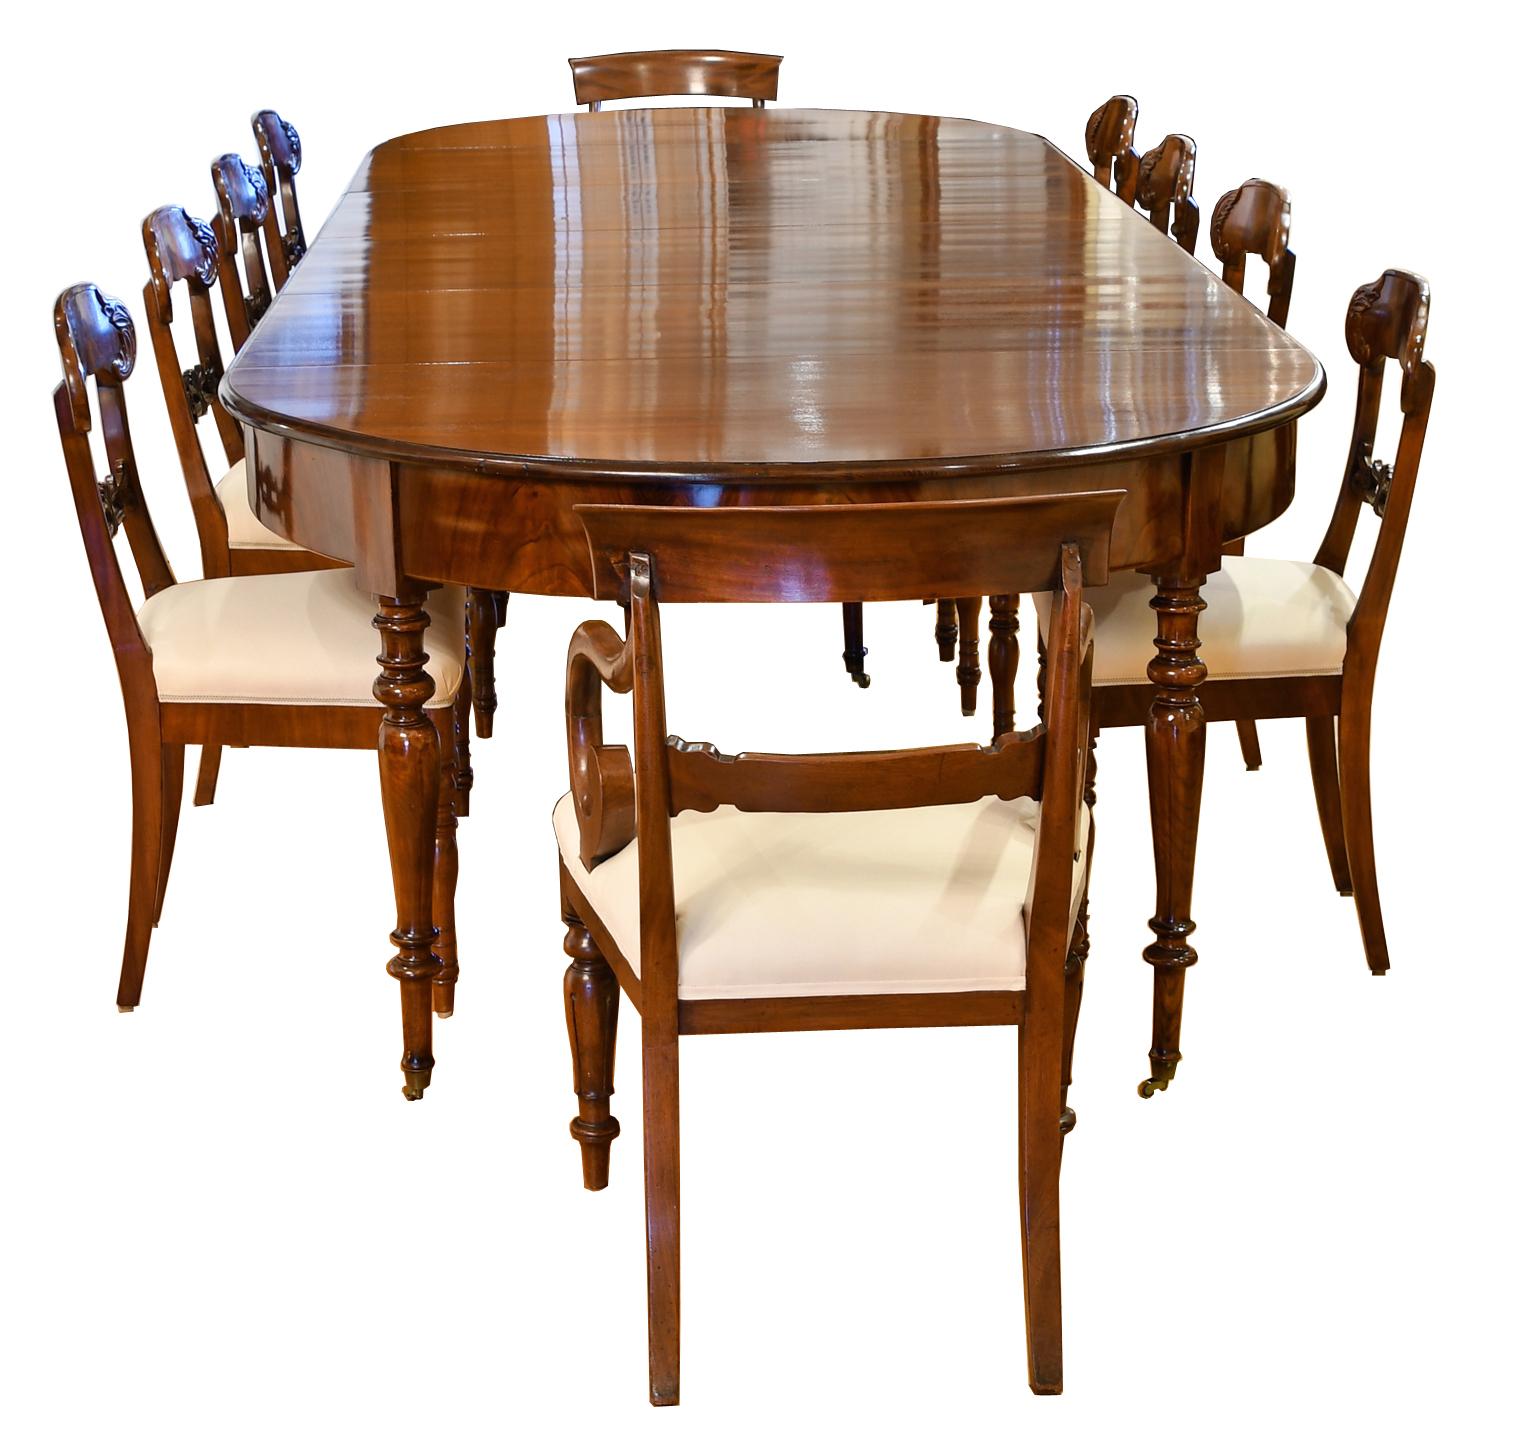 Regency Antique 12 Foot Extension Dining Table in Mahogany w Racetrack Top & Four Leaves